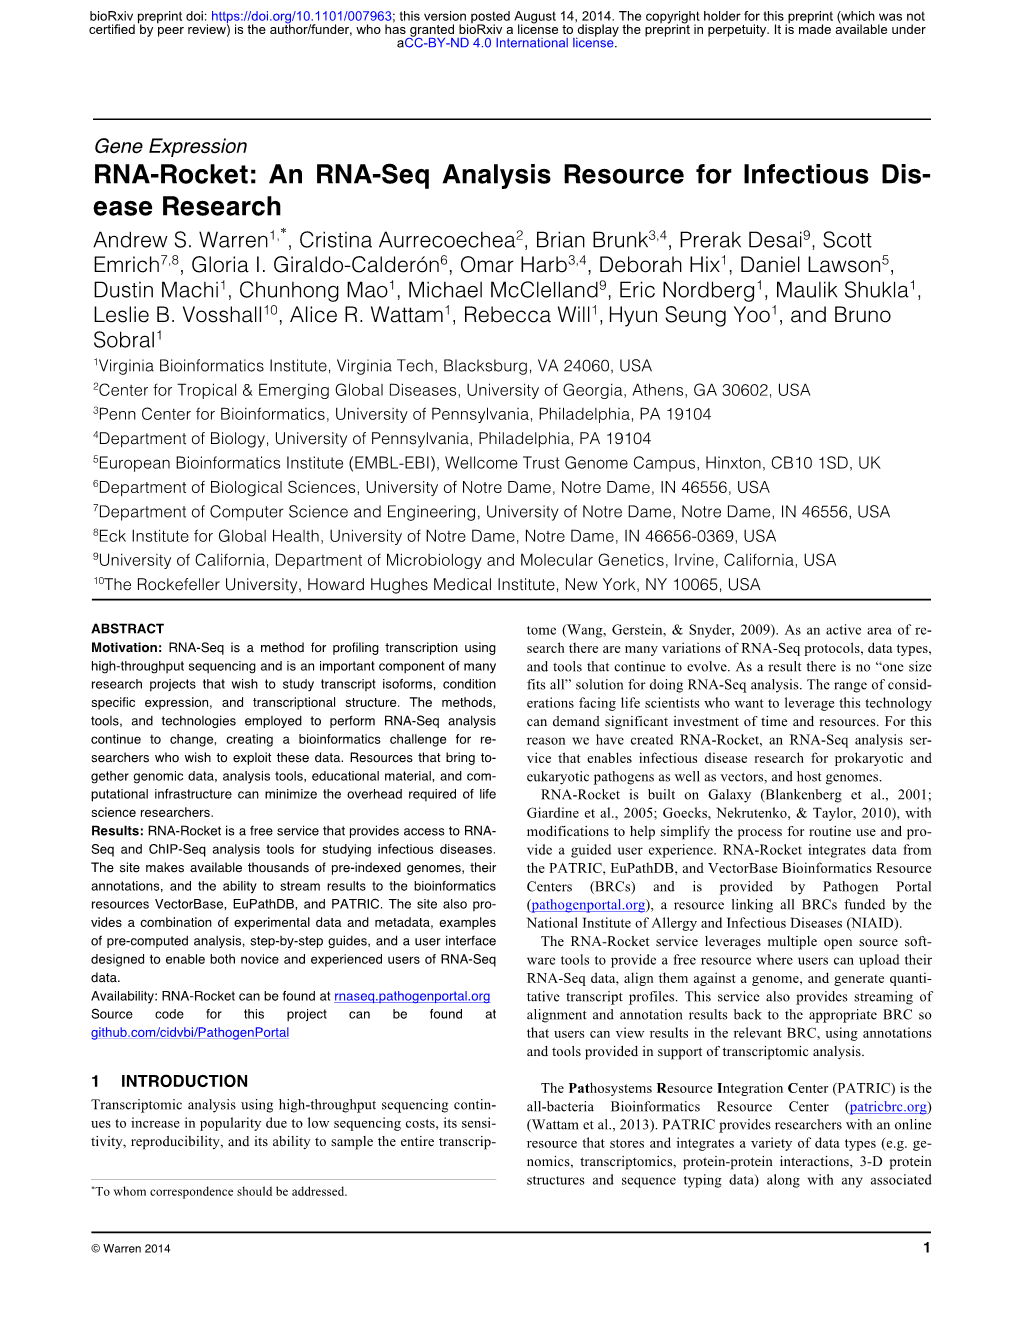 An RNA-Seq Analysis Resource for Infectious Disease Research